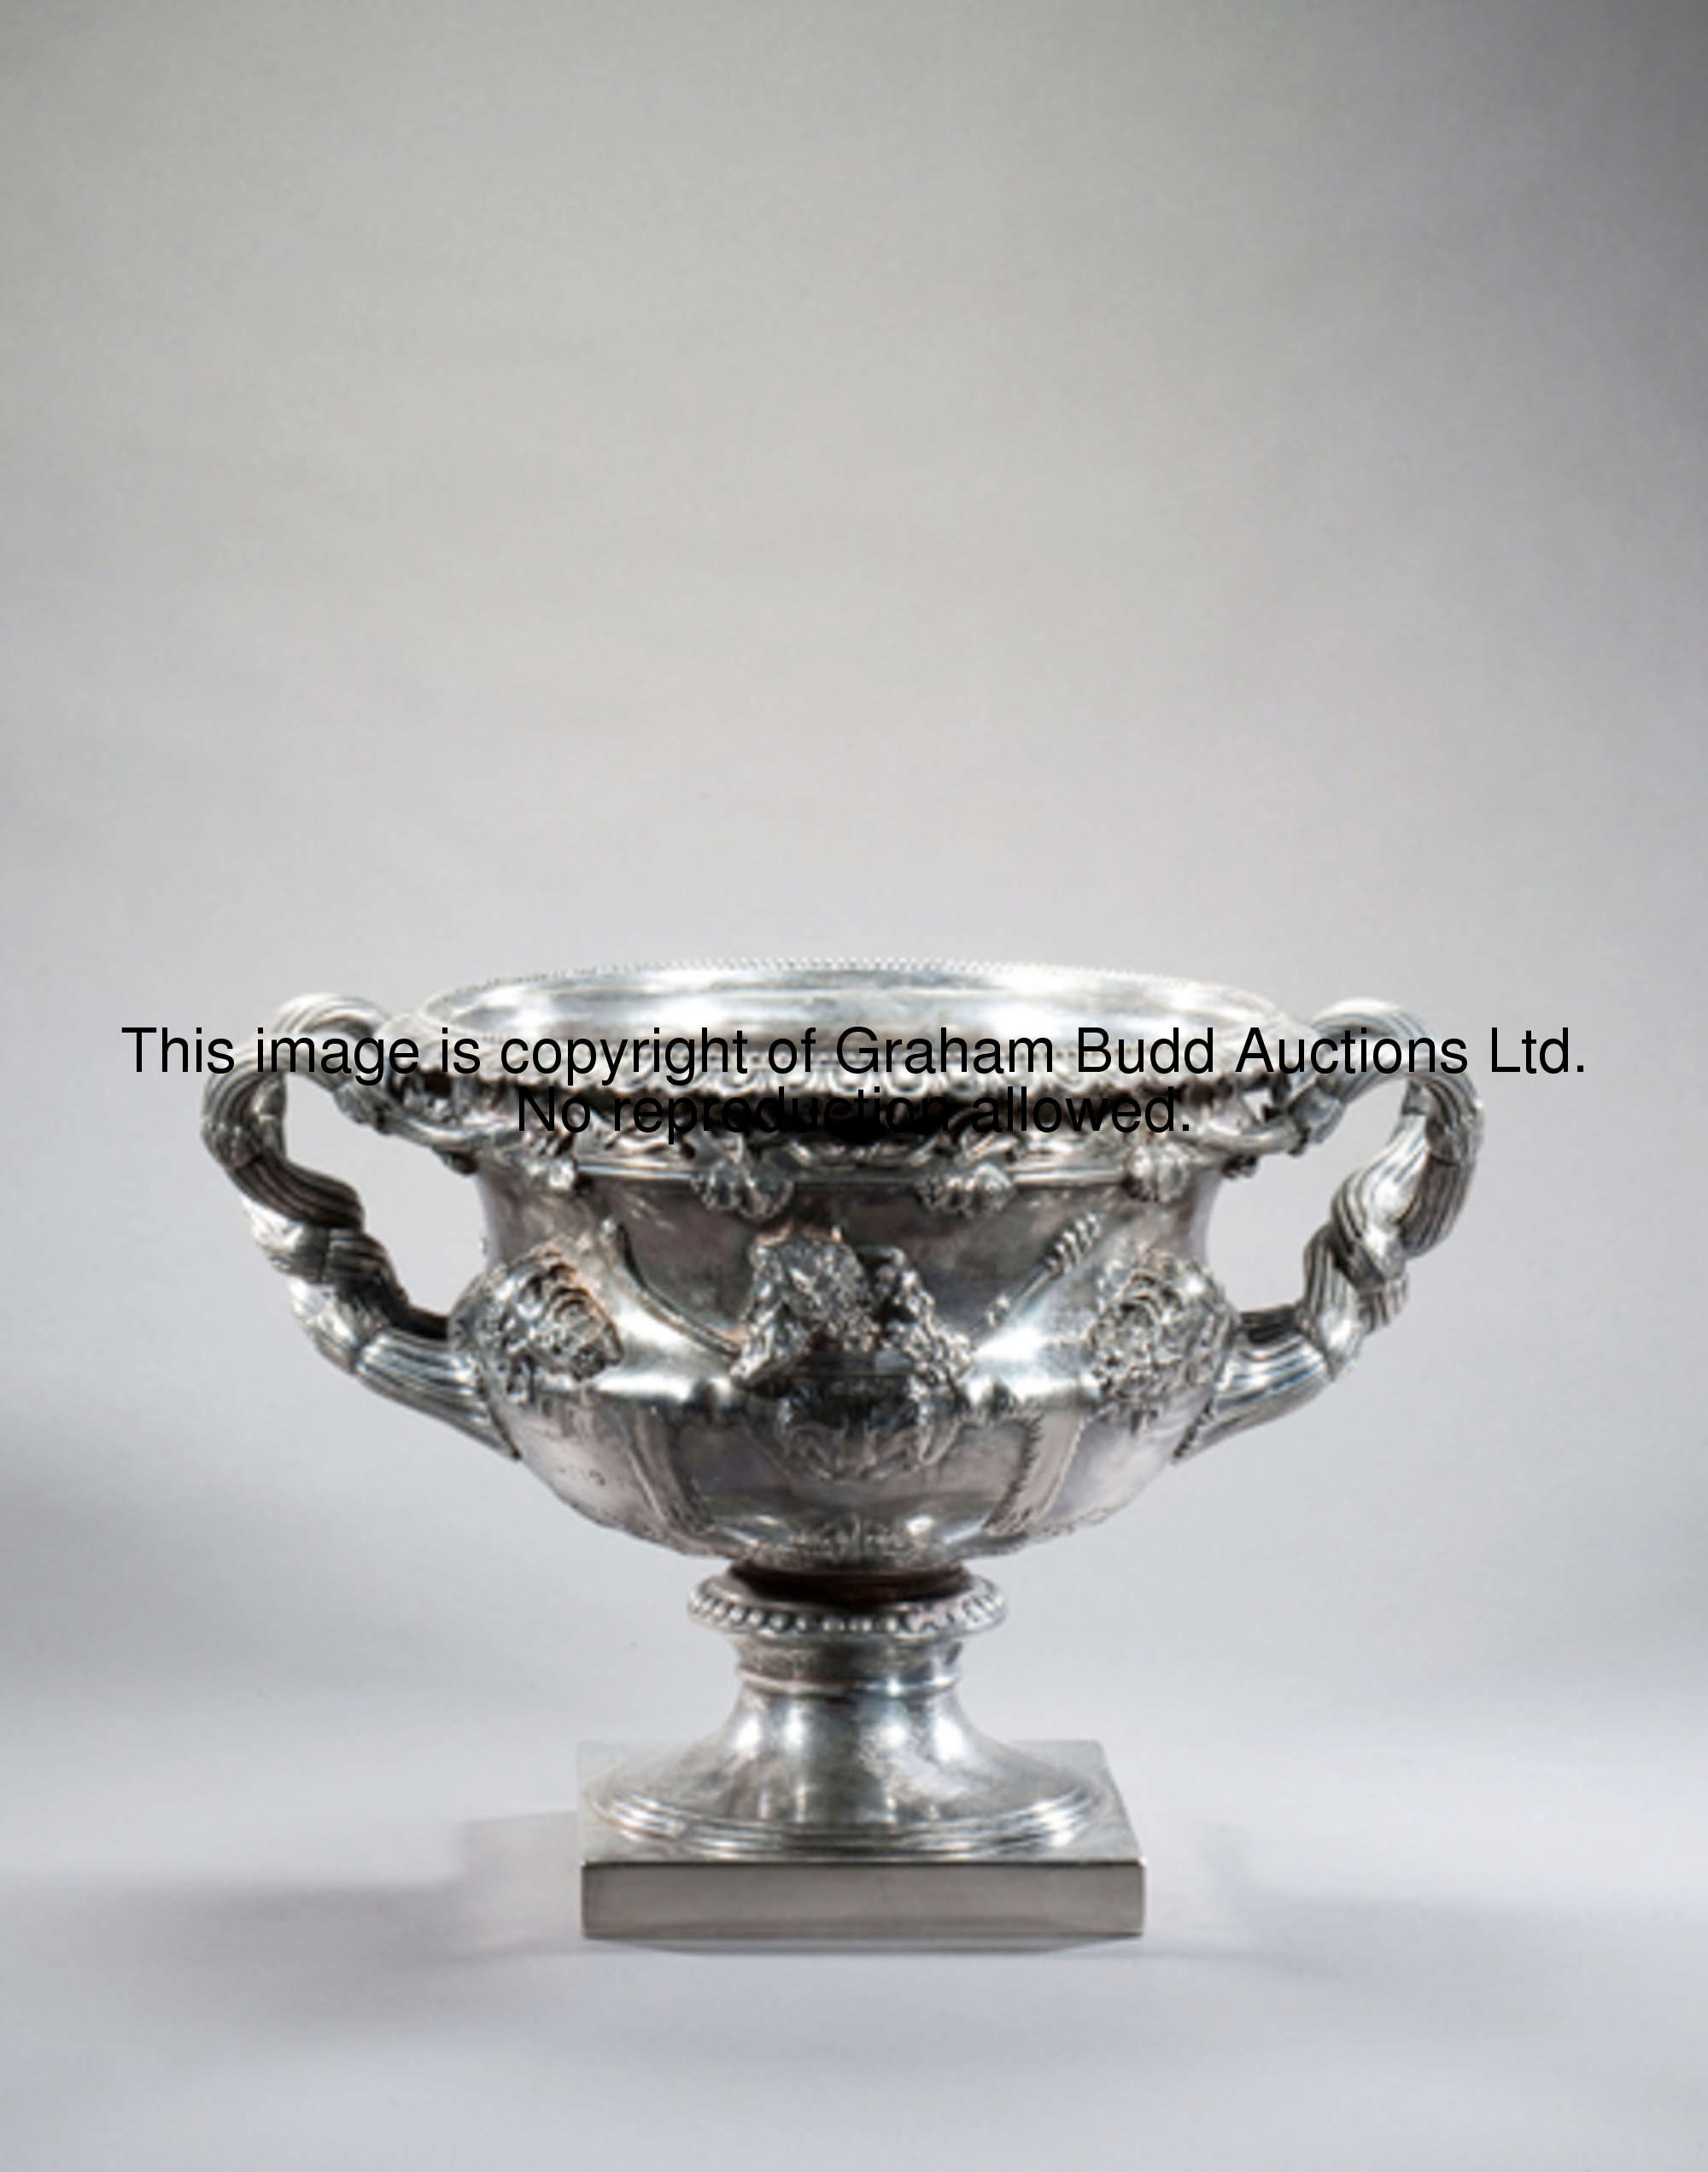 The trophy for the 1958 Imperial Cup Hurdle, in the form of a silver replica after the antique of th...